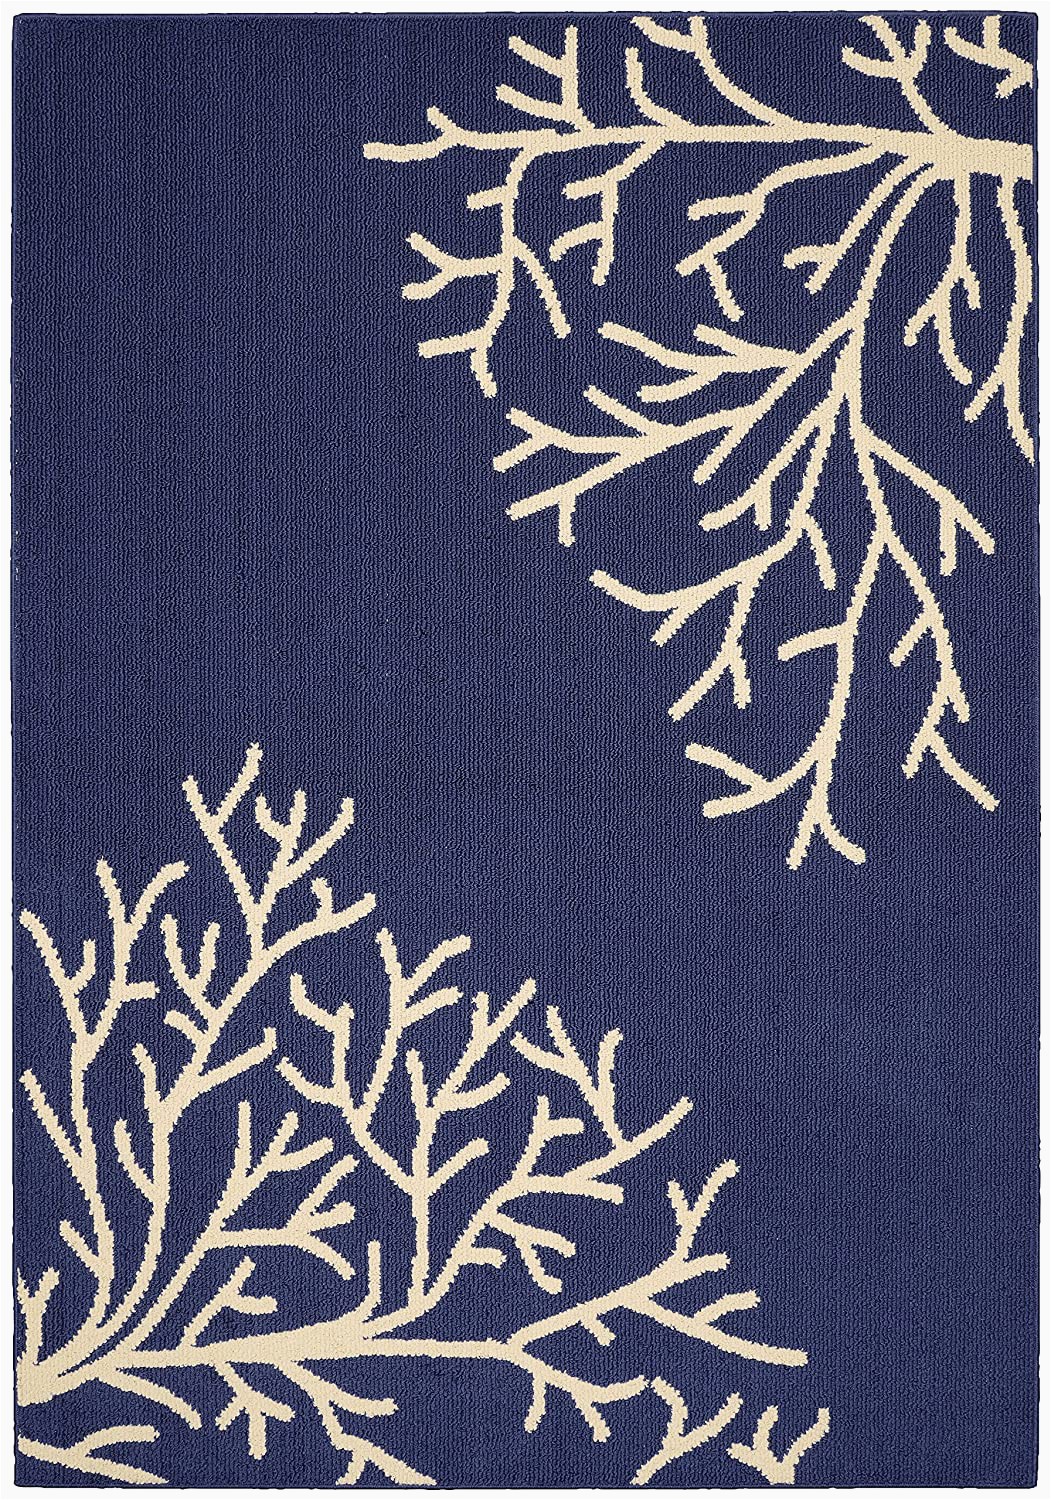 Navy and Coral area Rug Details About Tropical Wild Coral area Rug Carpet Coastal Beach House Ocean Sea Modern Decor